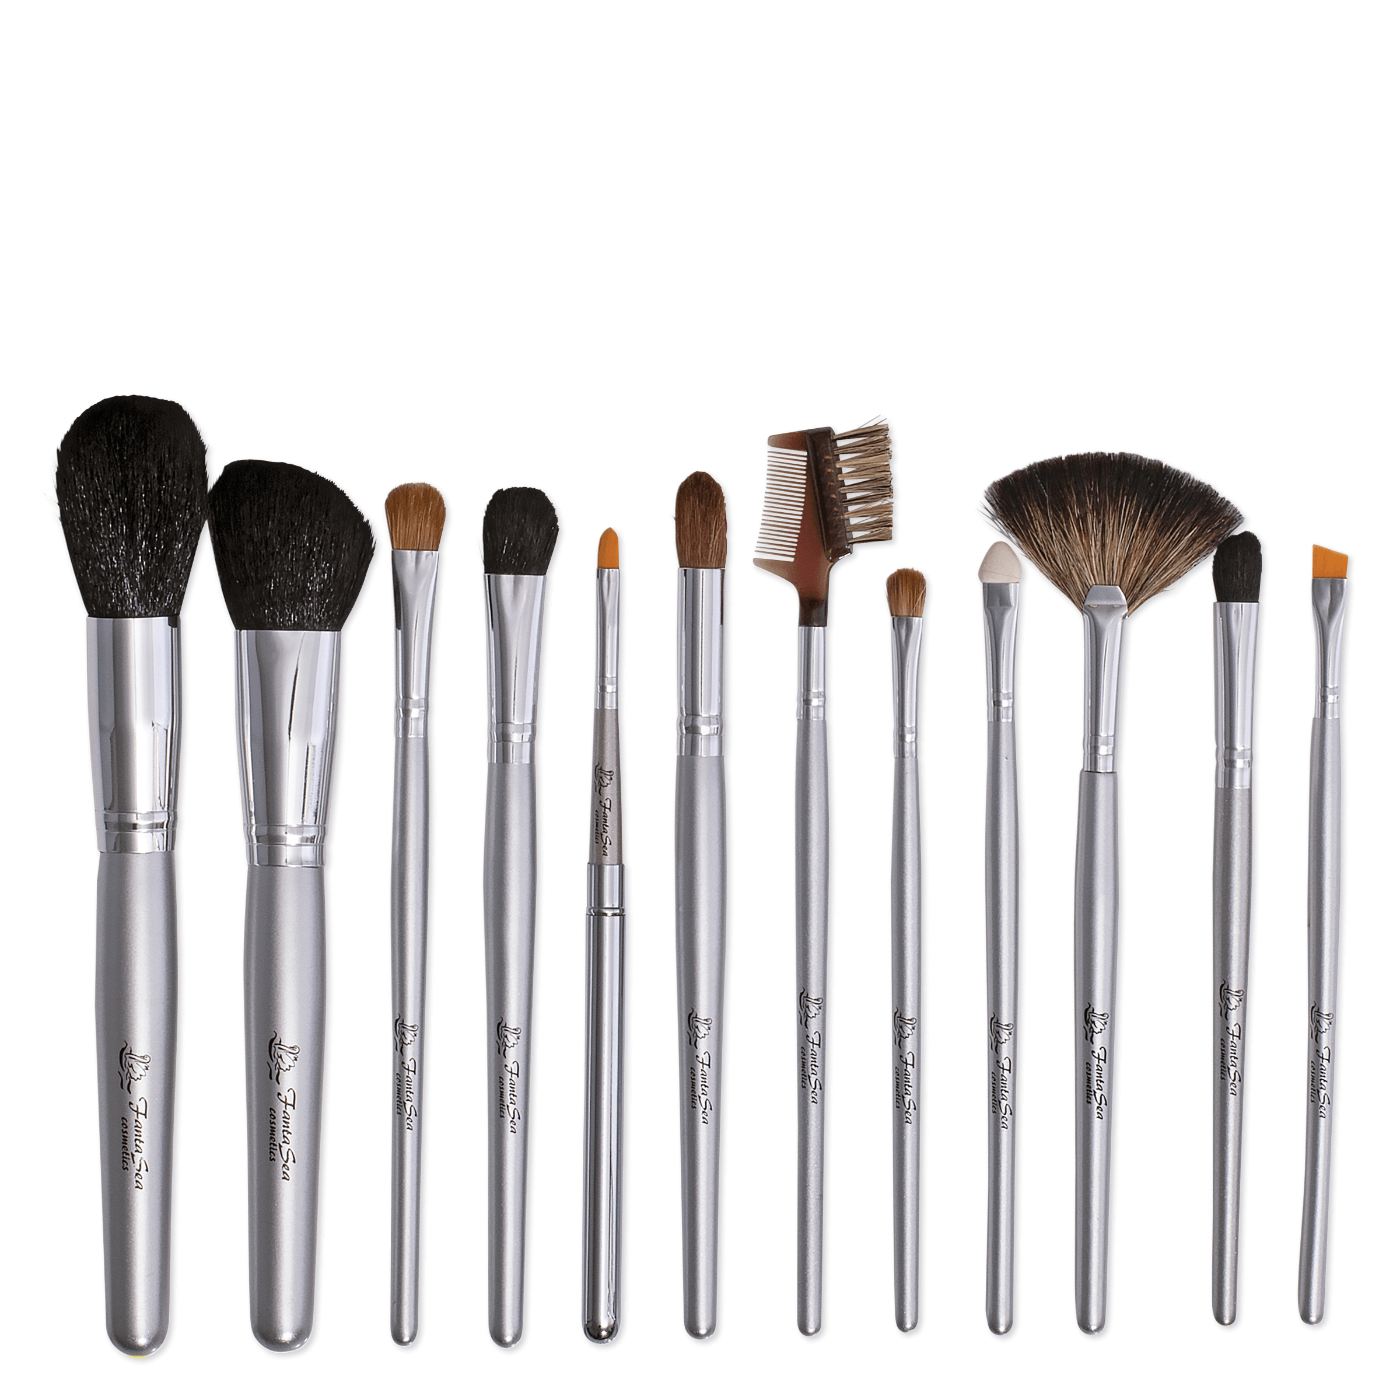 Makeup Brush Set with Case- 12 pc.